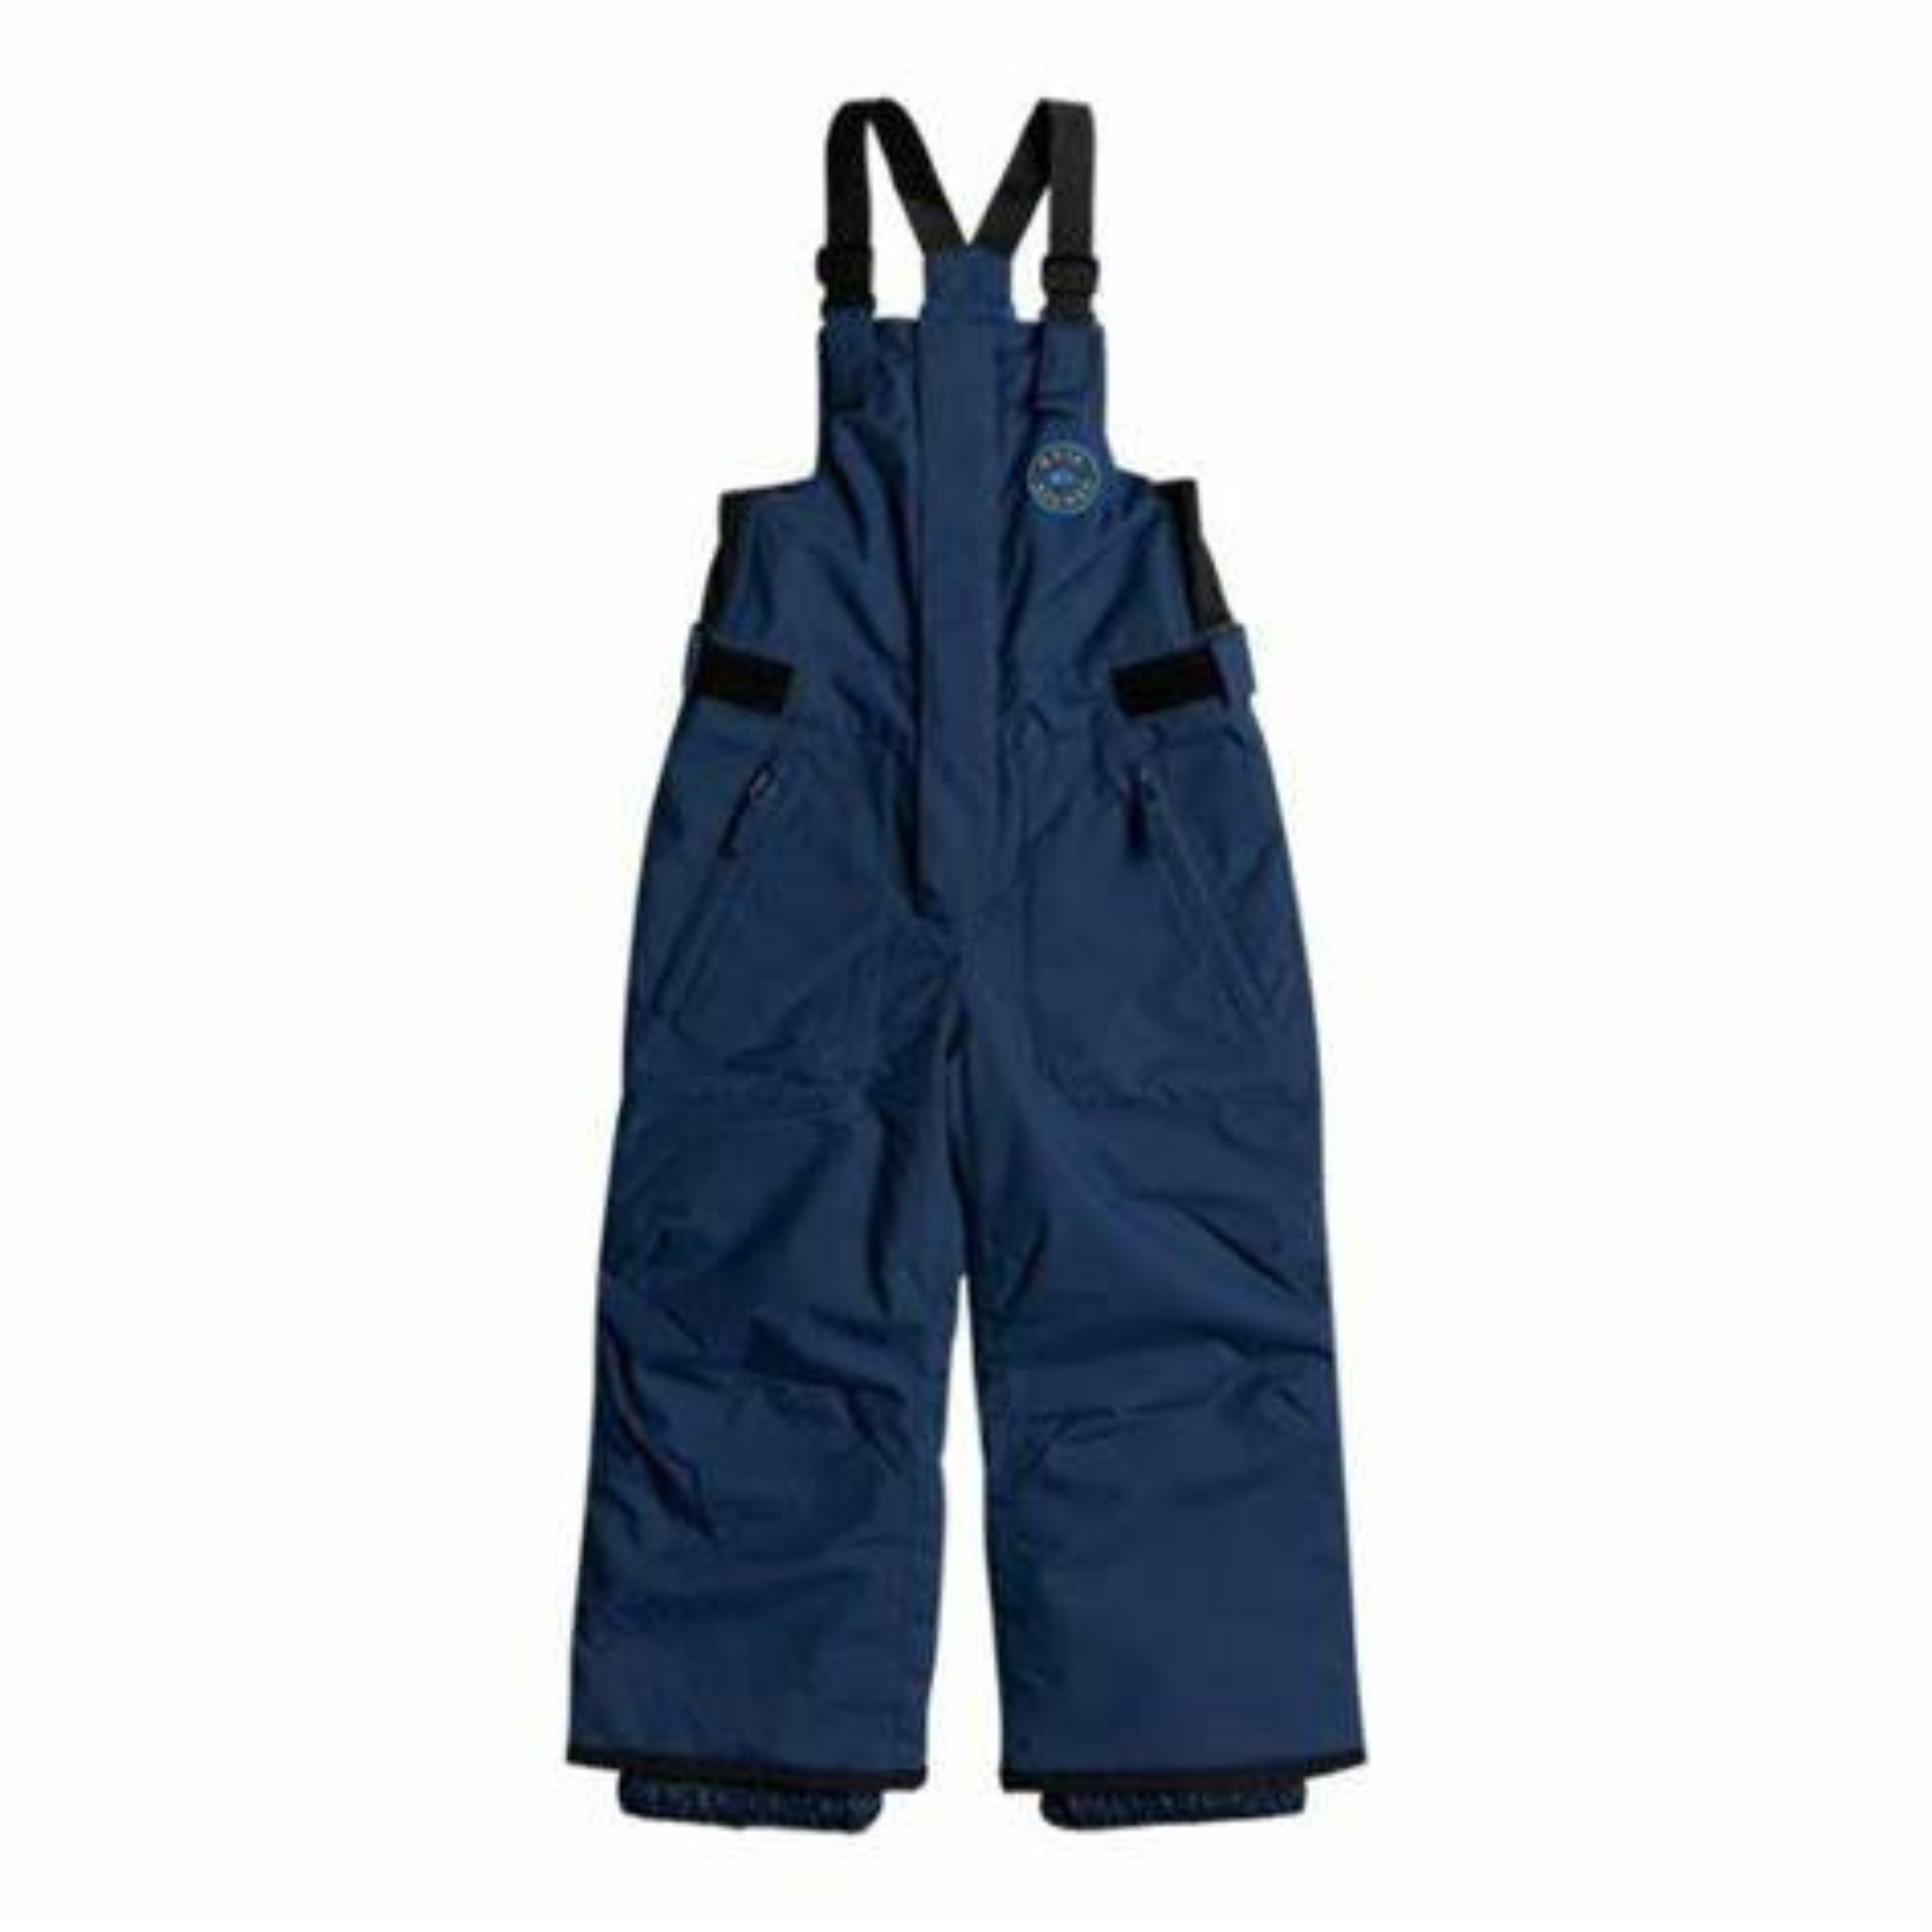 Quiksilver Boogie Kid's Pants - Insignia Blue